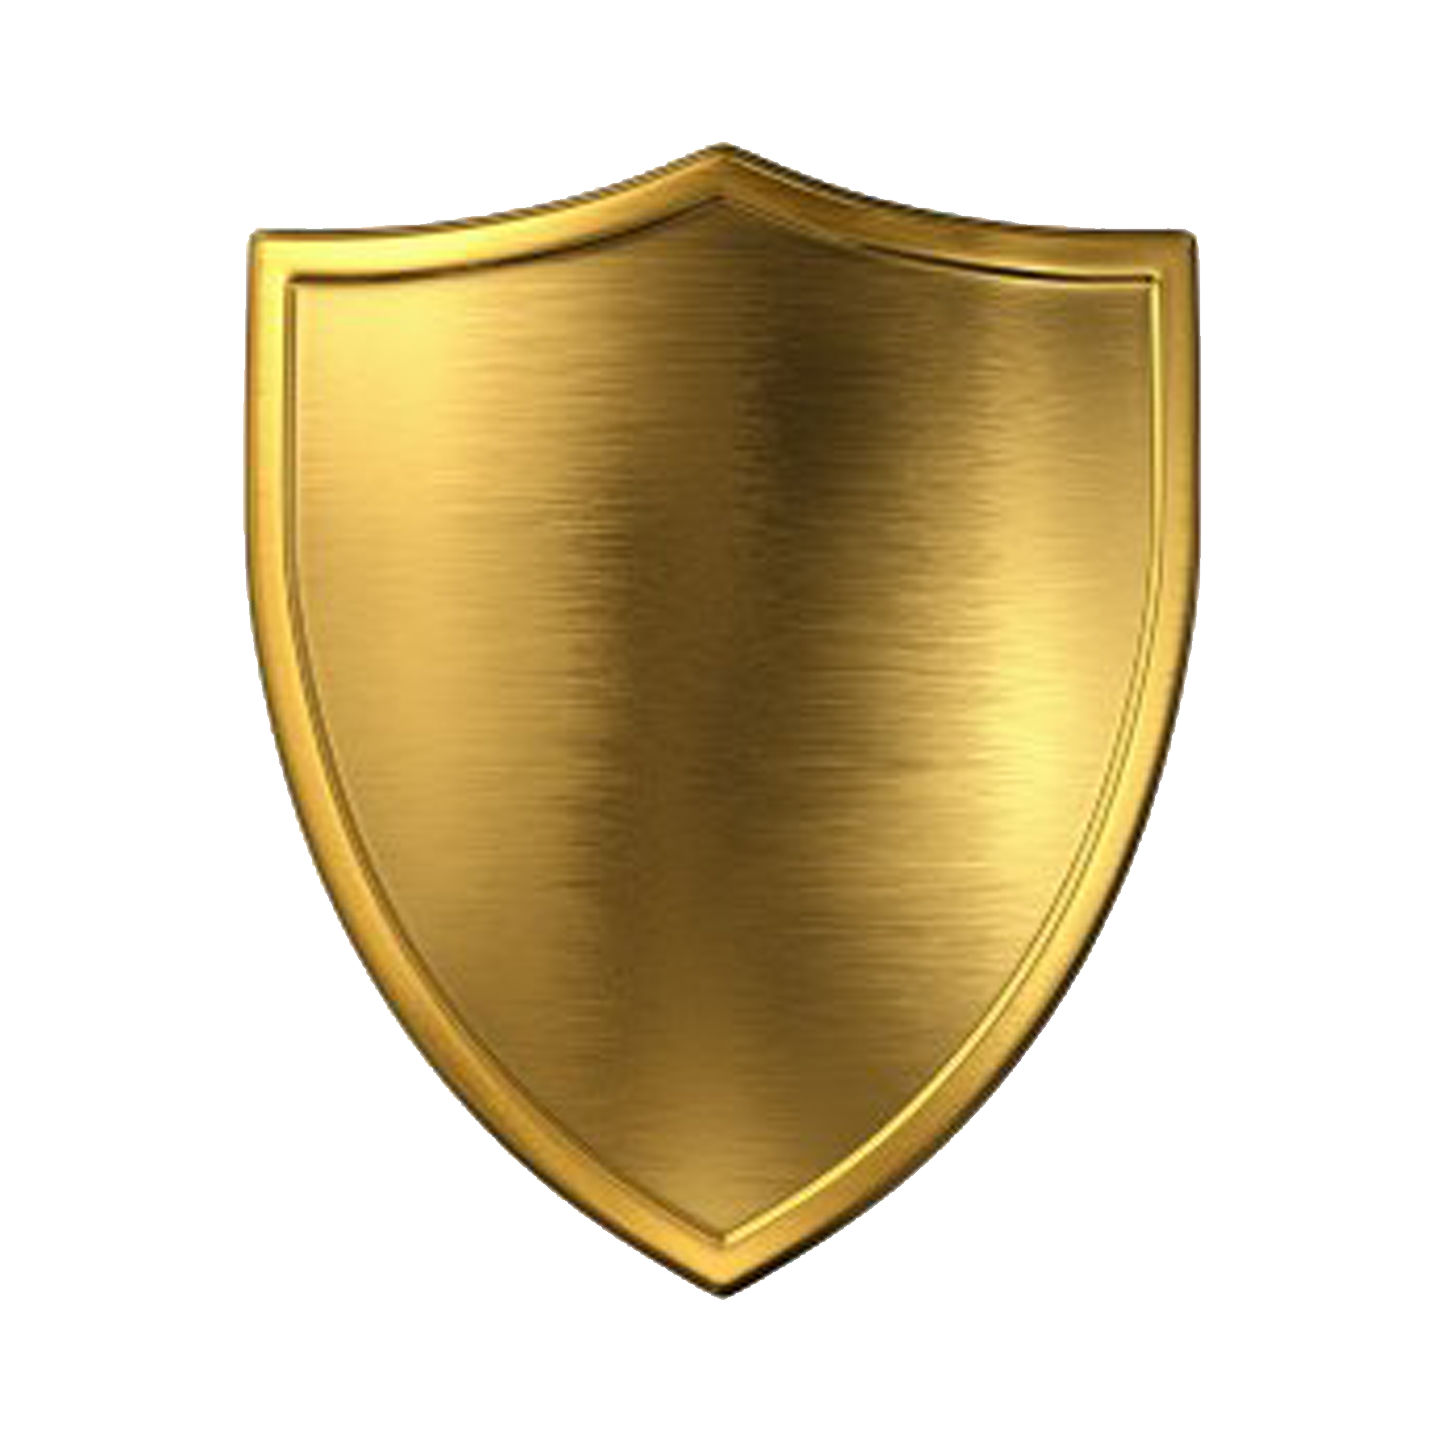 Shield PNG image, free download, pictures